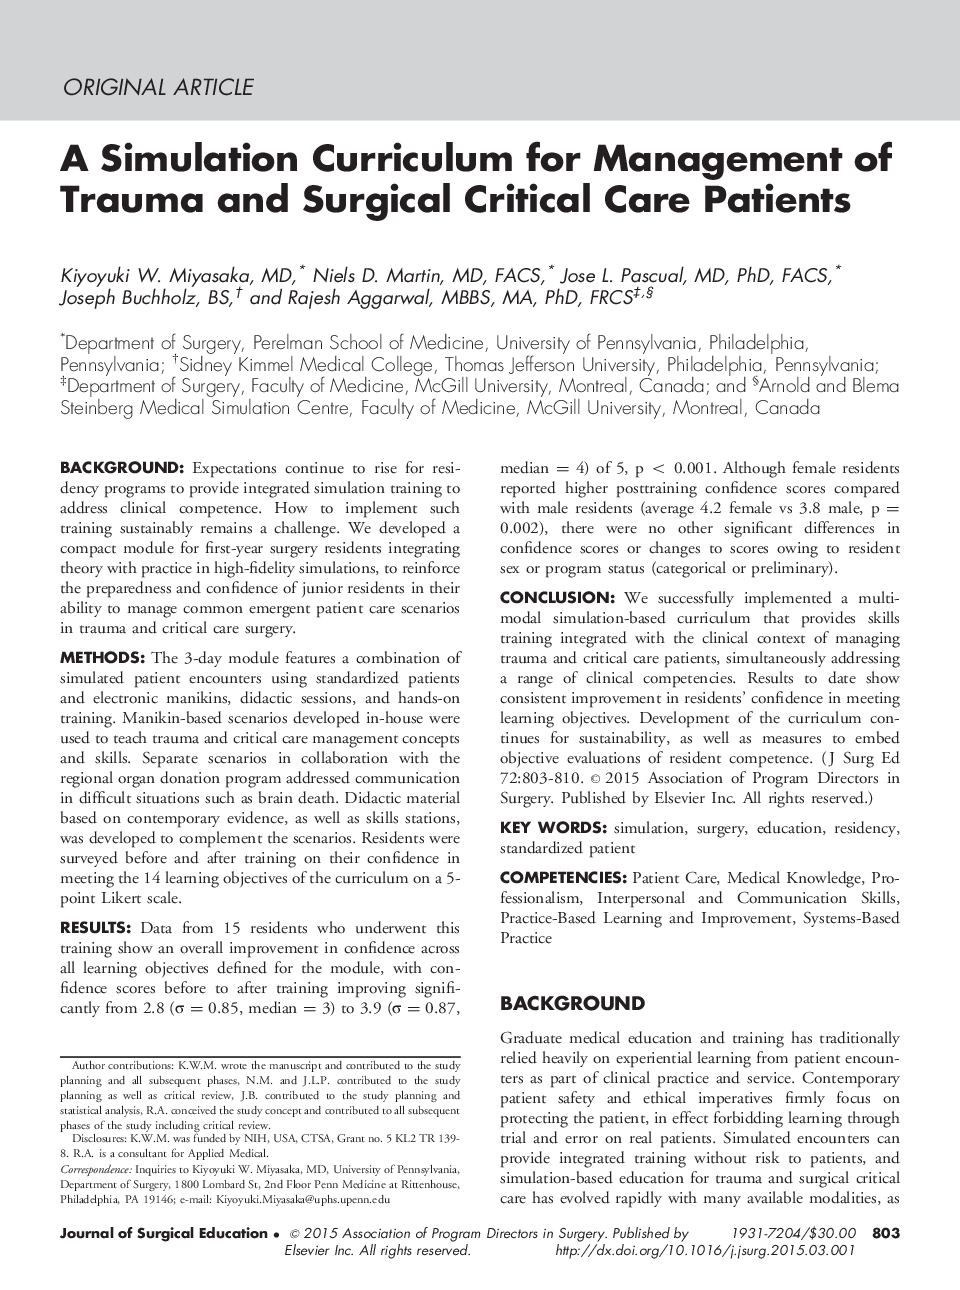 A Simulation Curriculum for Management of Trauma and Surgical Critical Care Patients 